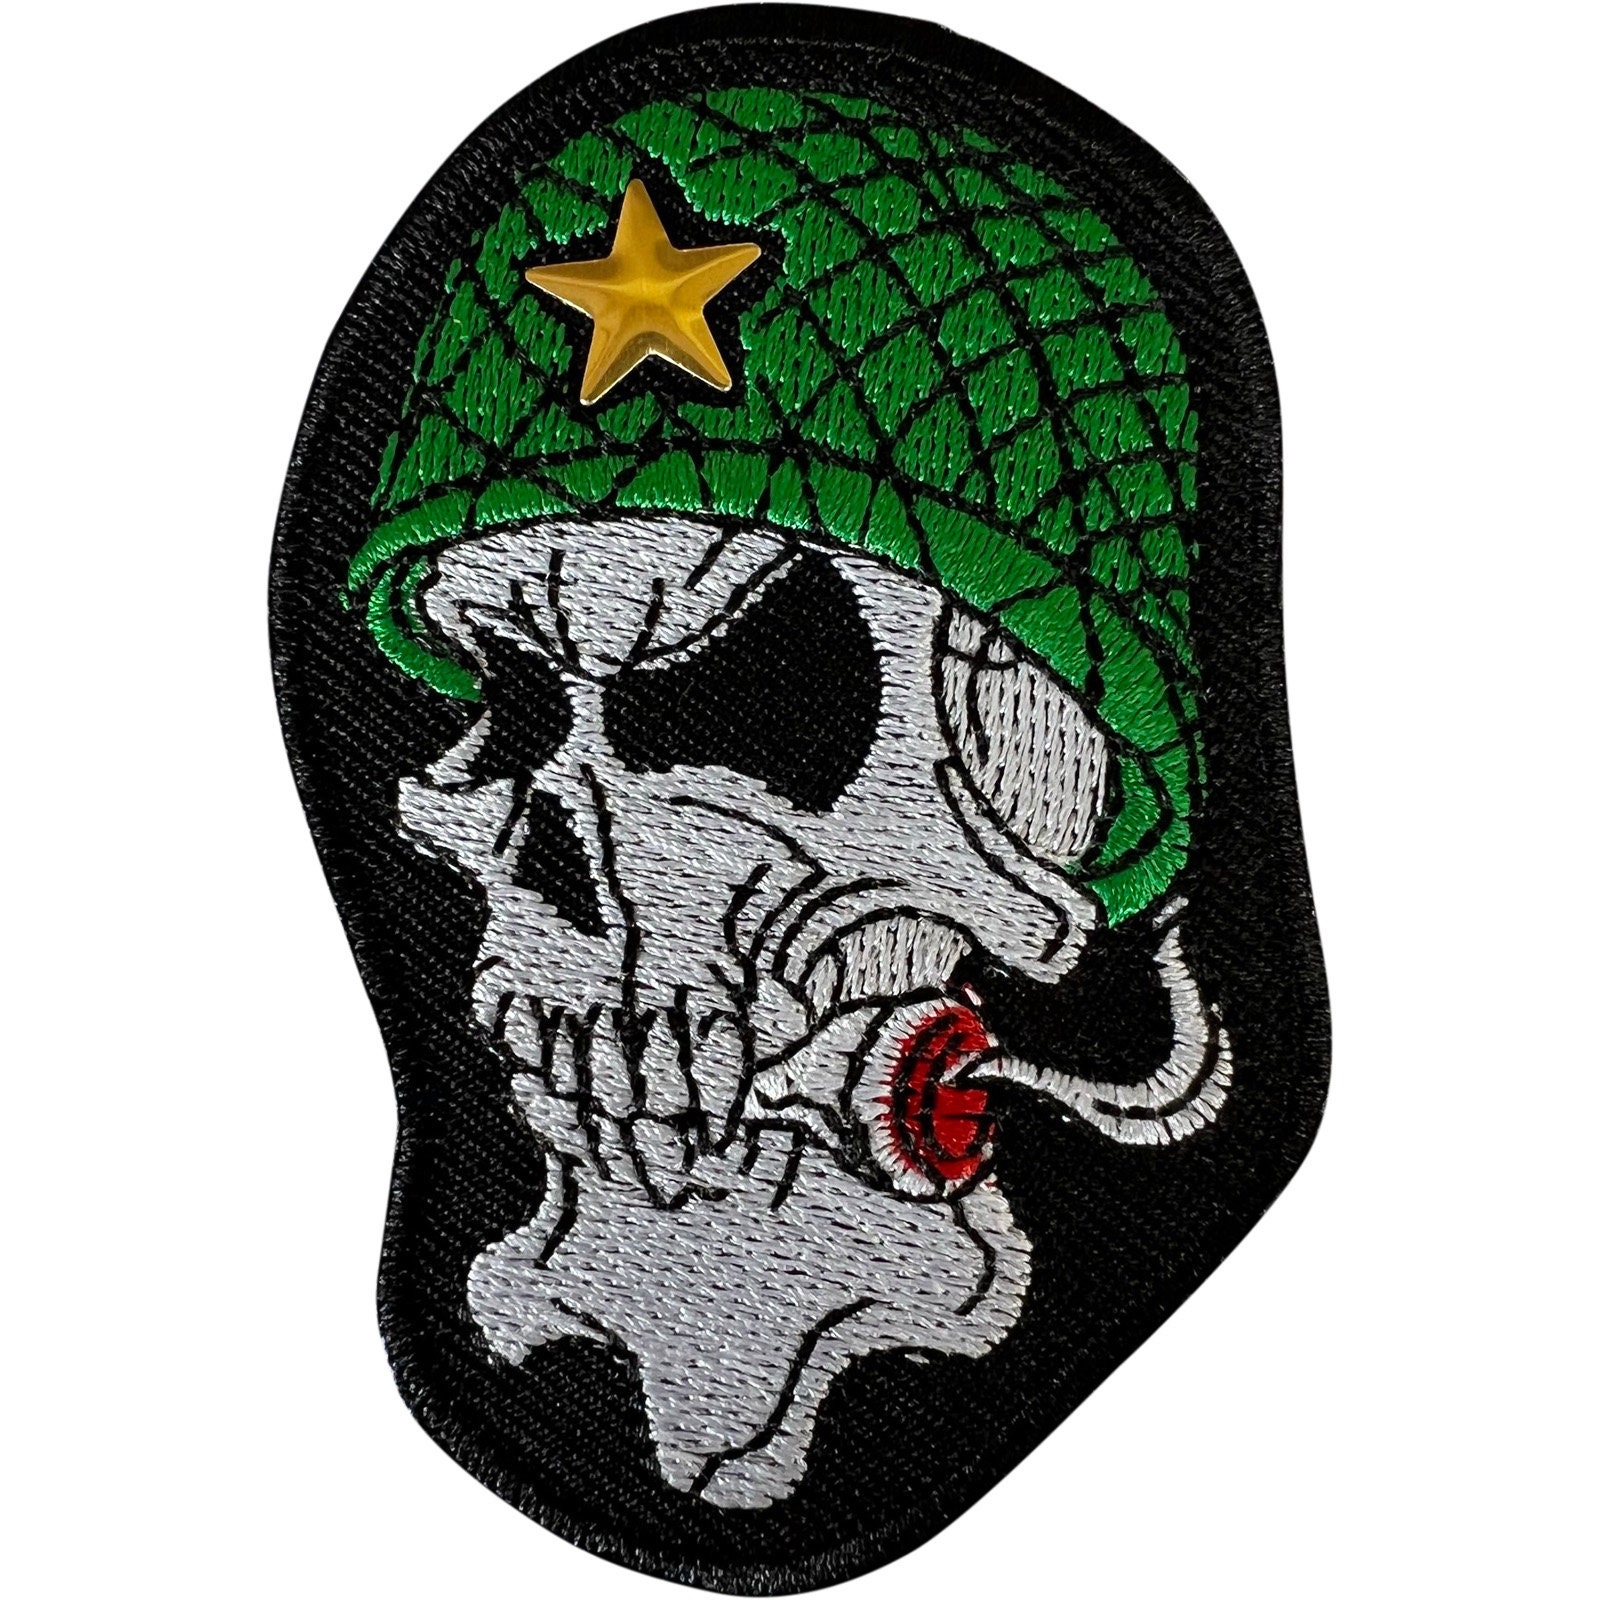 Skull Mexico Embroidered Patch Flag Armband Bag Matching Badge Iron Patches  for Clothing Sewing Embroidery Patches on Clothes